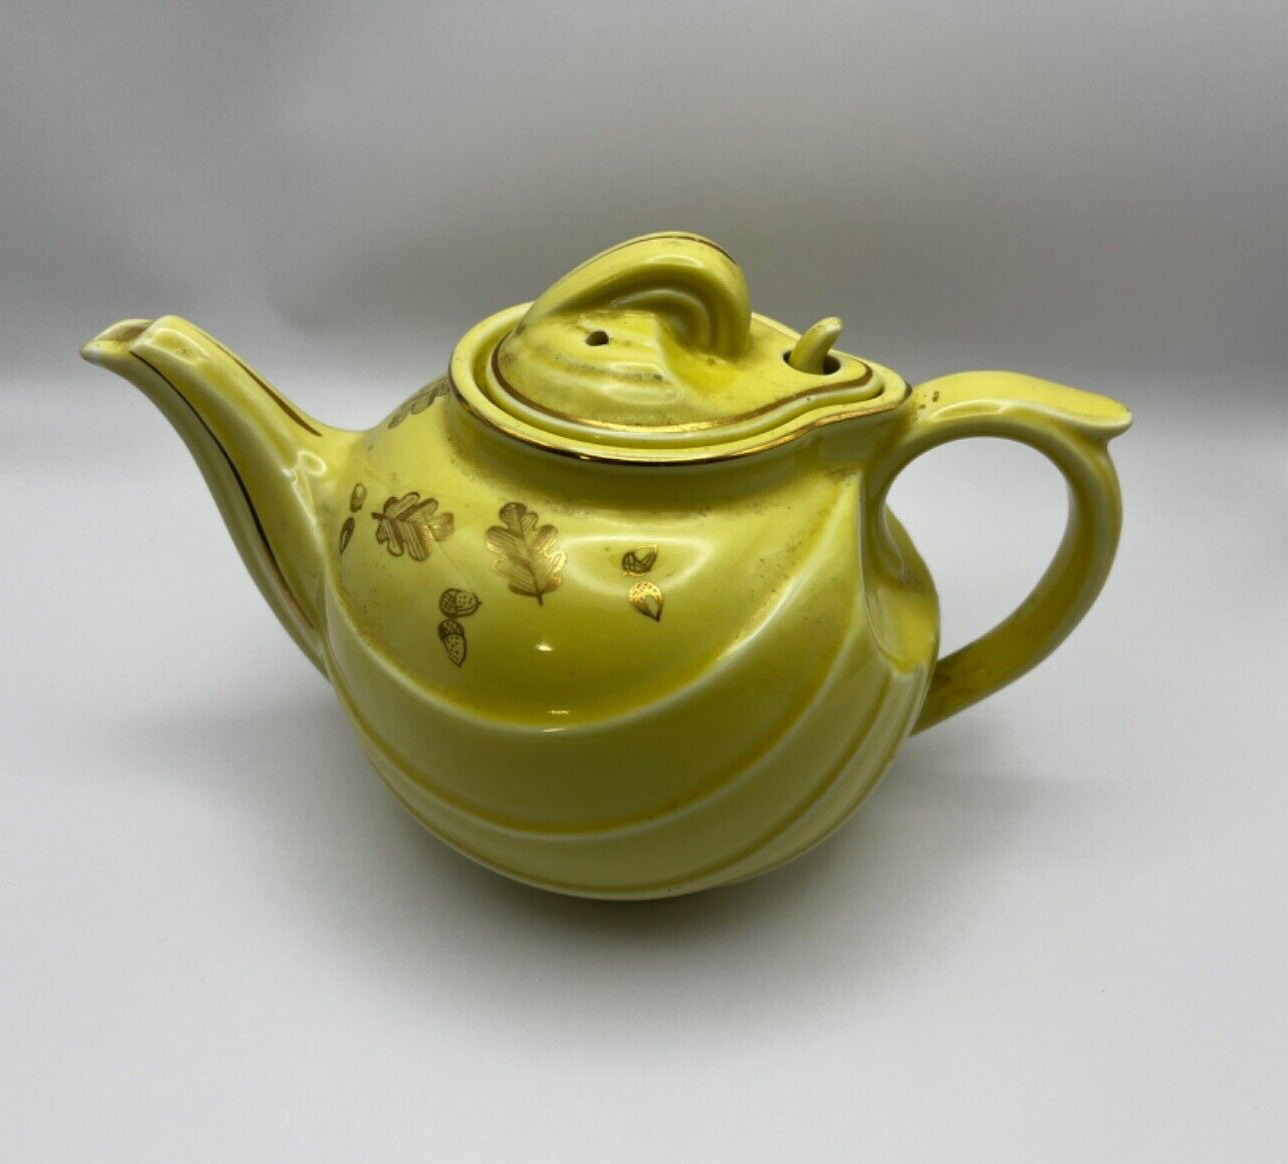 RARE SHAPED VINTAGE HALL'S TEA POT YELLOW-EXCELLENT AND CLEAN